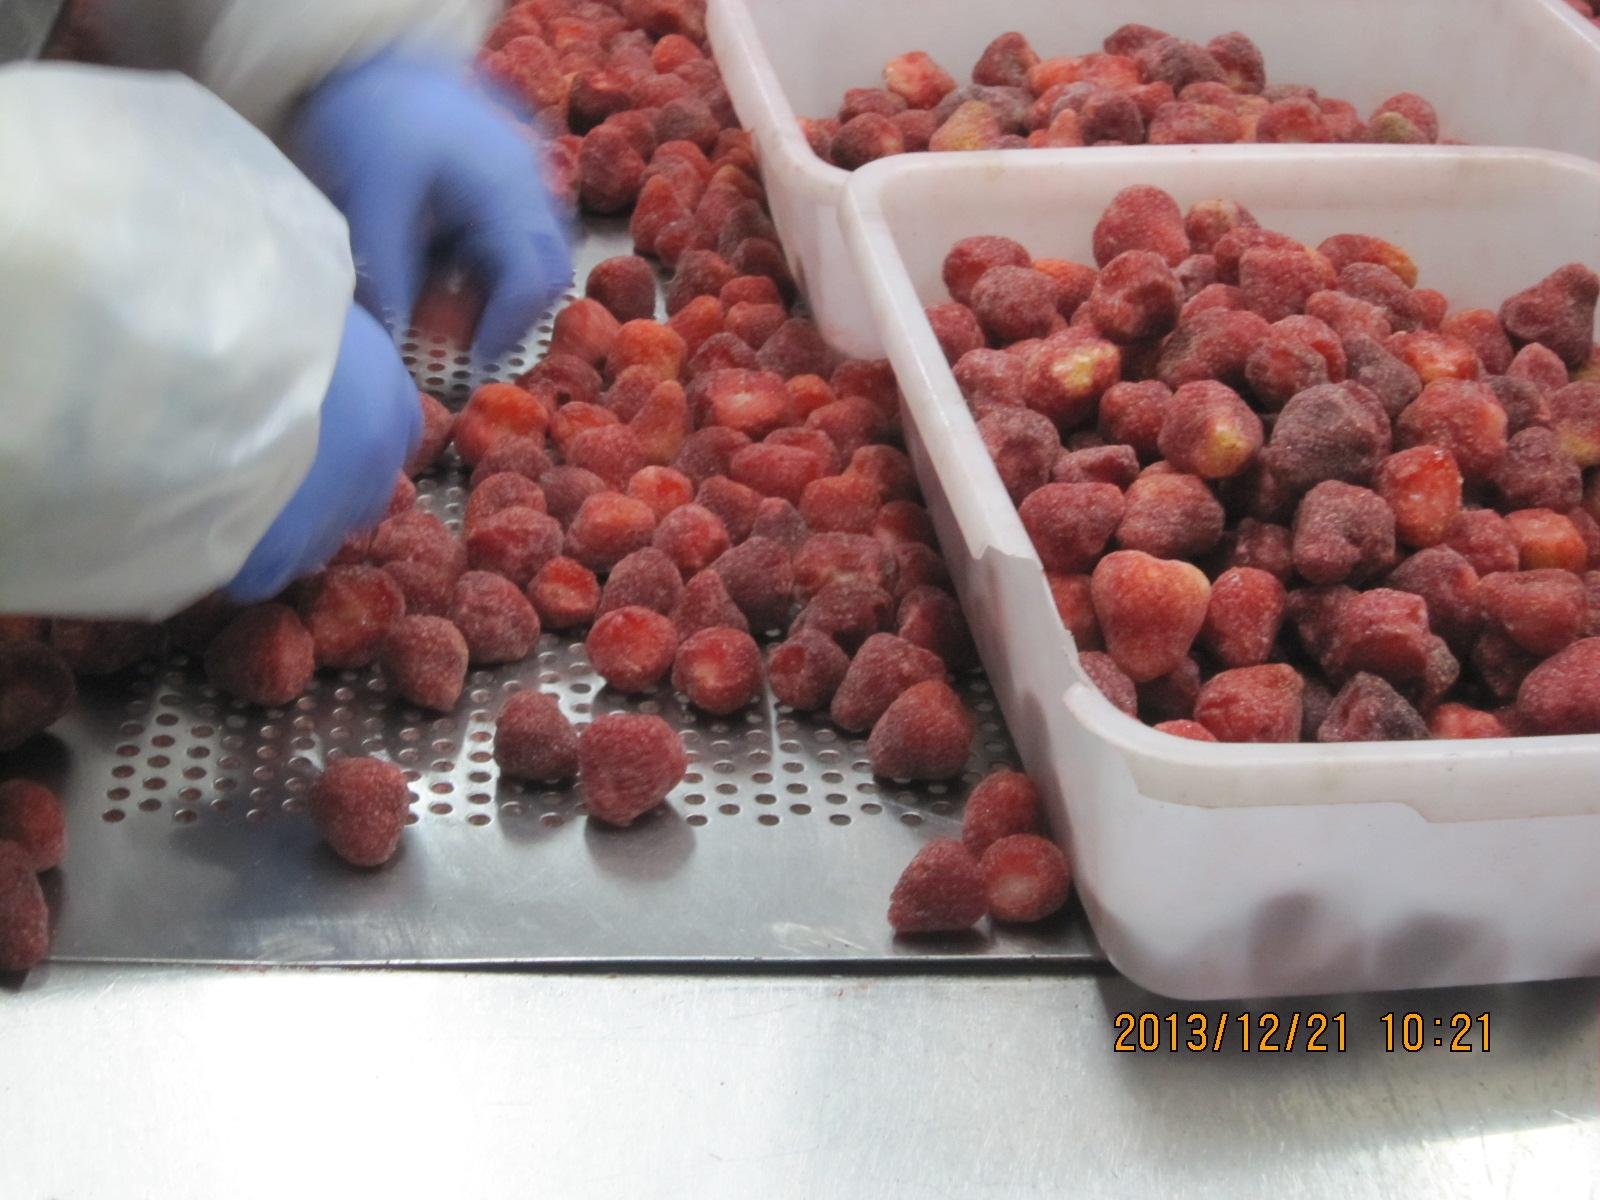 IQF Strawberries,Frozen Whole Strawberries,IQF Strawberry,American no.13 variety 7